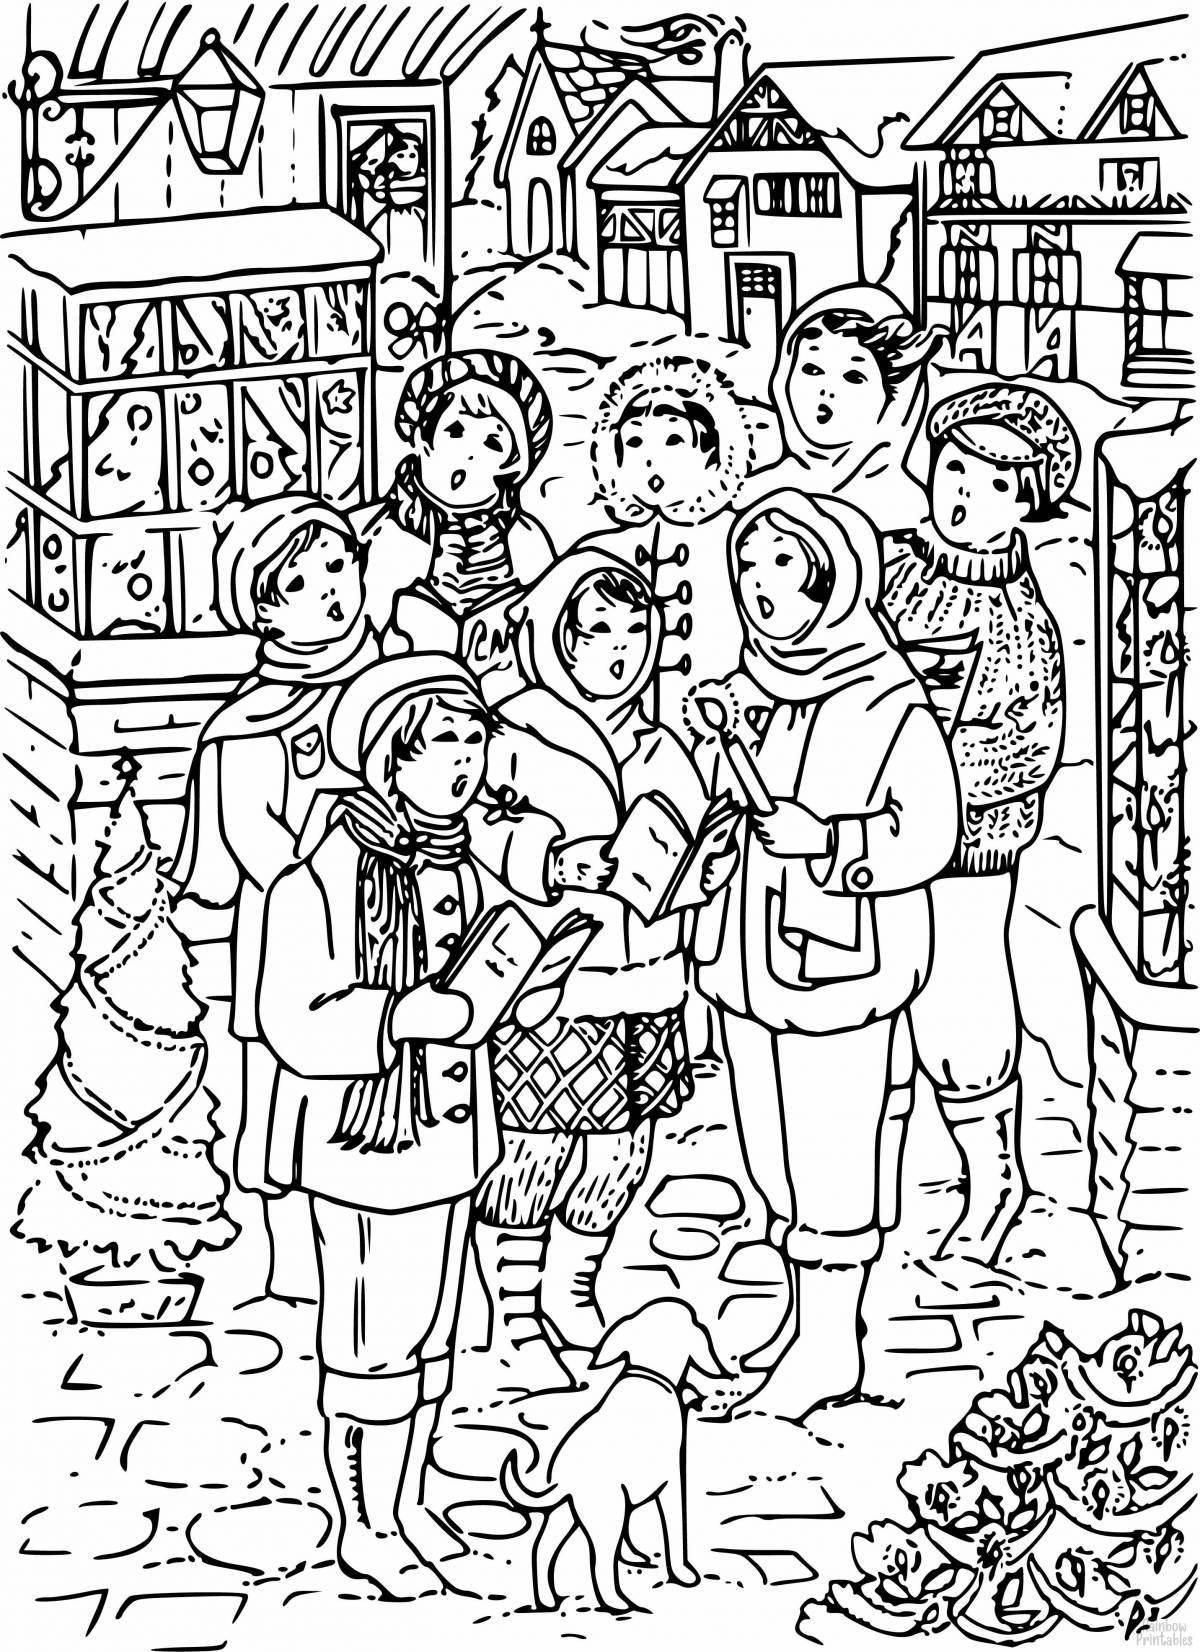 Christmas Eve festive coloring page